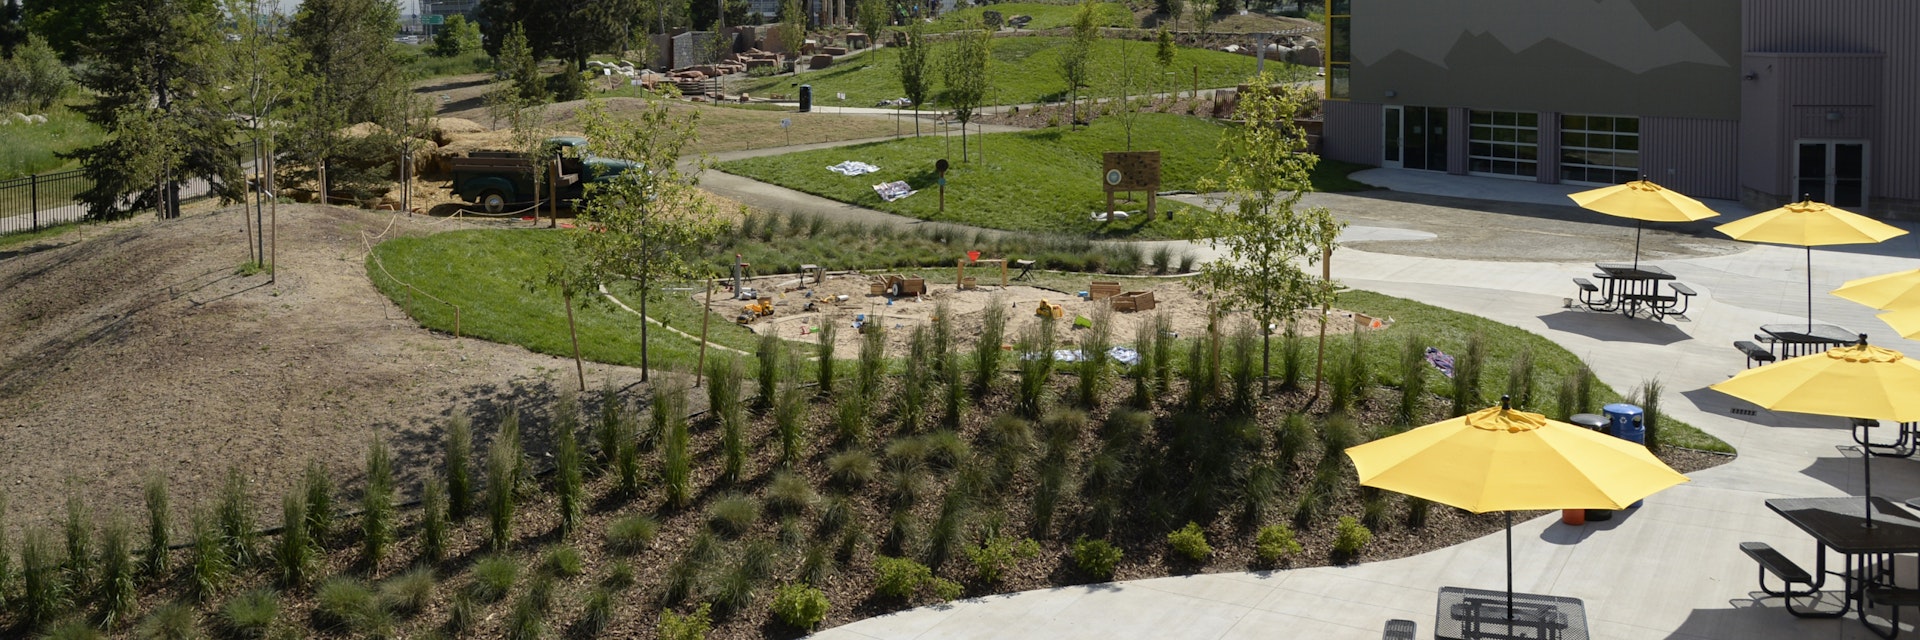 DENVER, CO - June 23: Joy Park is separated into many areas that include sand, water and even a fort building area Tuesday, June 23, 2015 at the Denver Children's Museum in Denver, Colorado. The one acre park opened behind the museum which includes a sand area, zip line and water play area for children and parents alike. (Photo By Brent Lewis/The Denver Post via Getty Images)